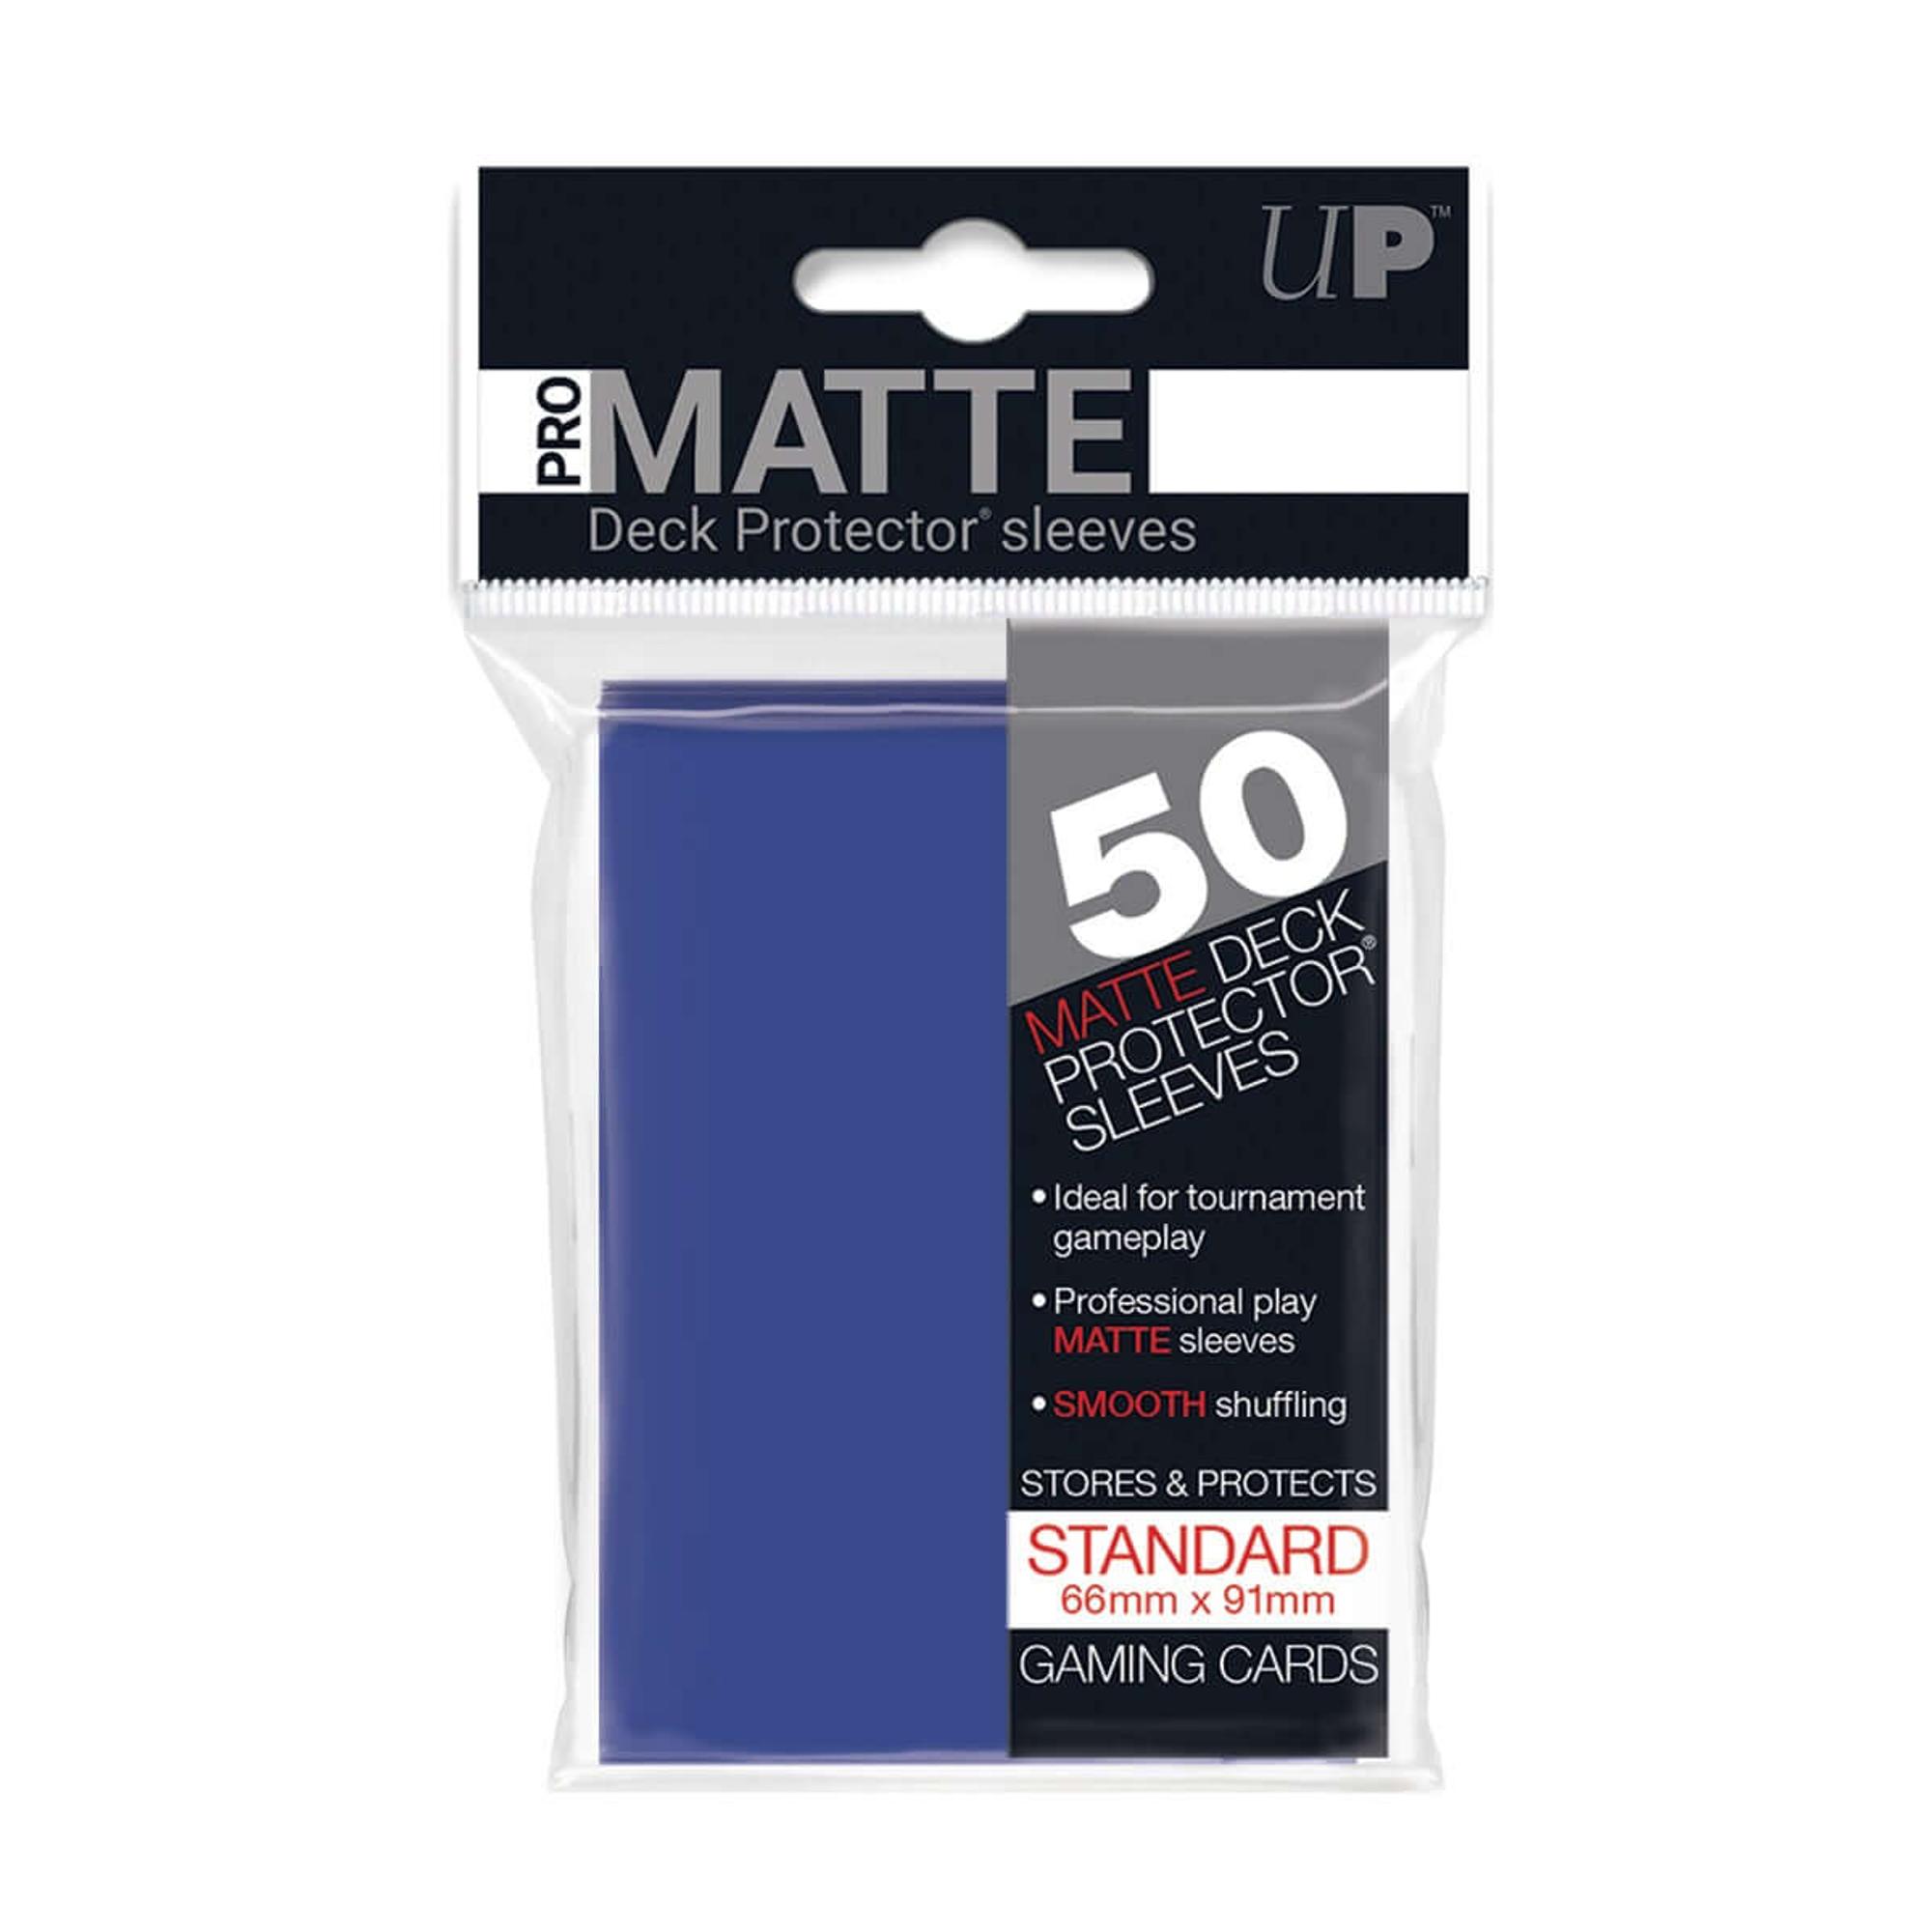 Ultra Pro PRO-Matte Standard Deck Protector Sleeves (Blue)(50 ct)